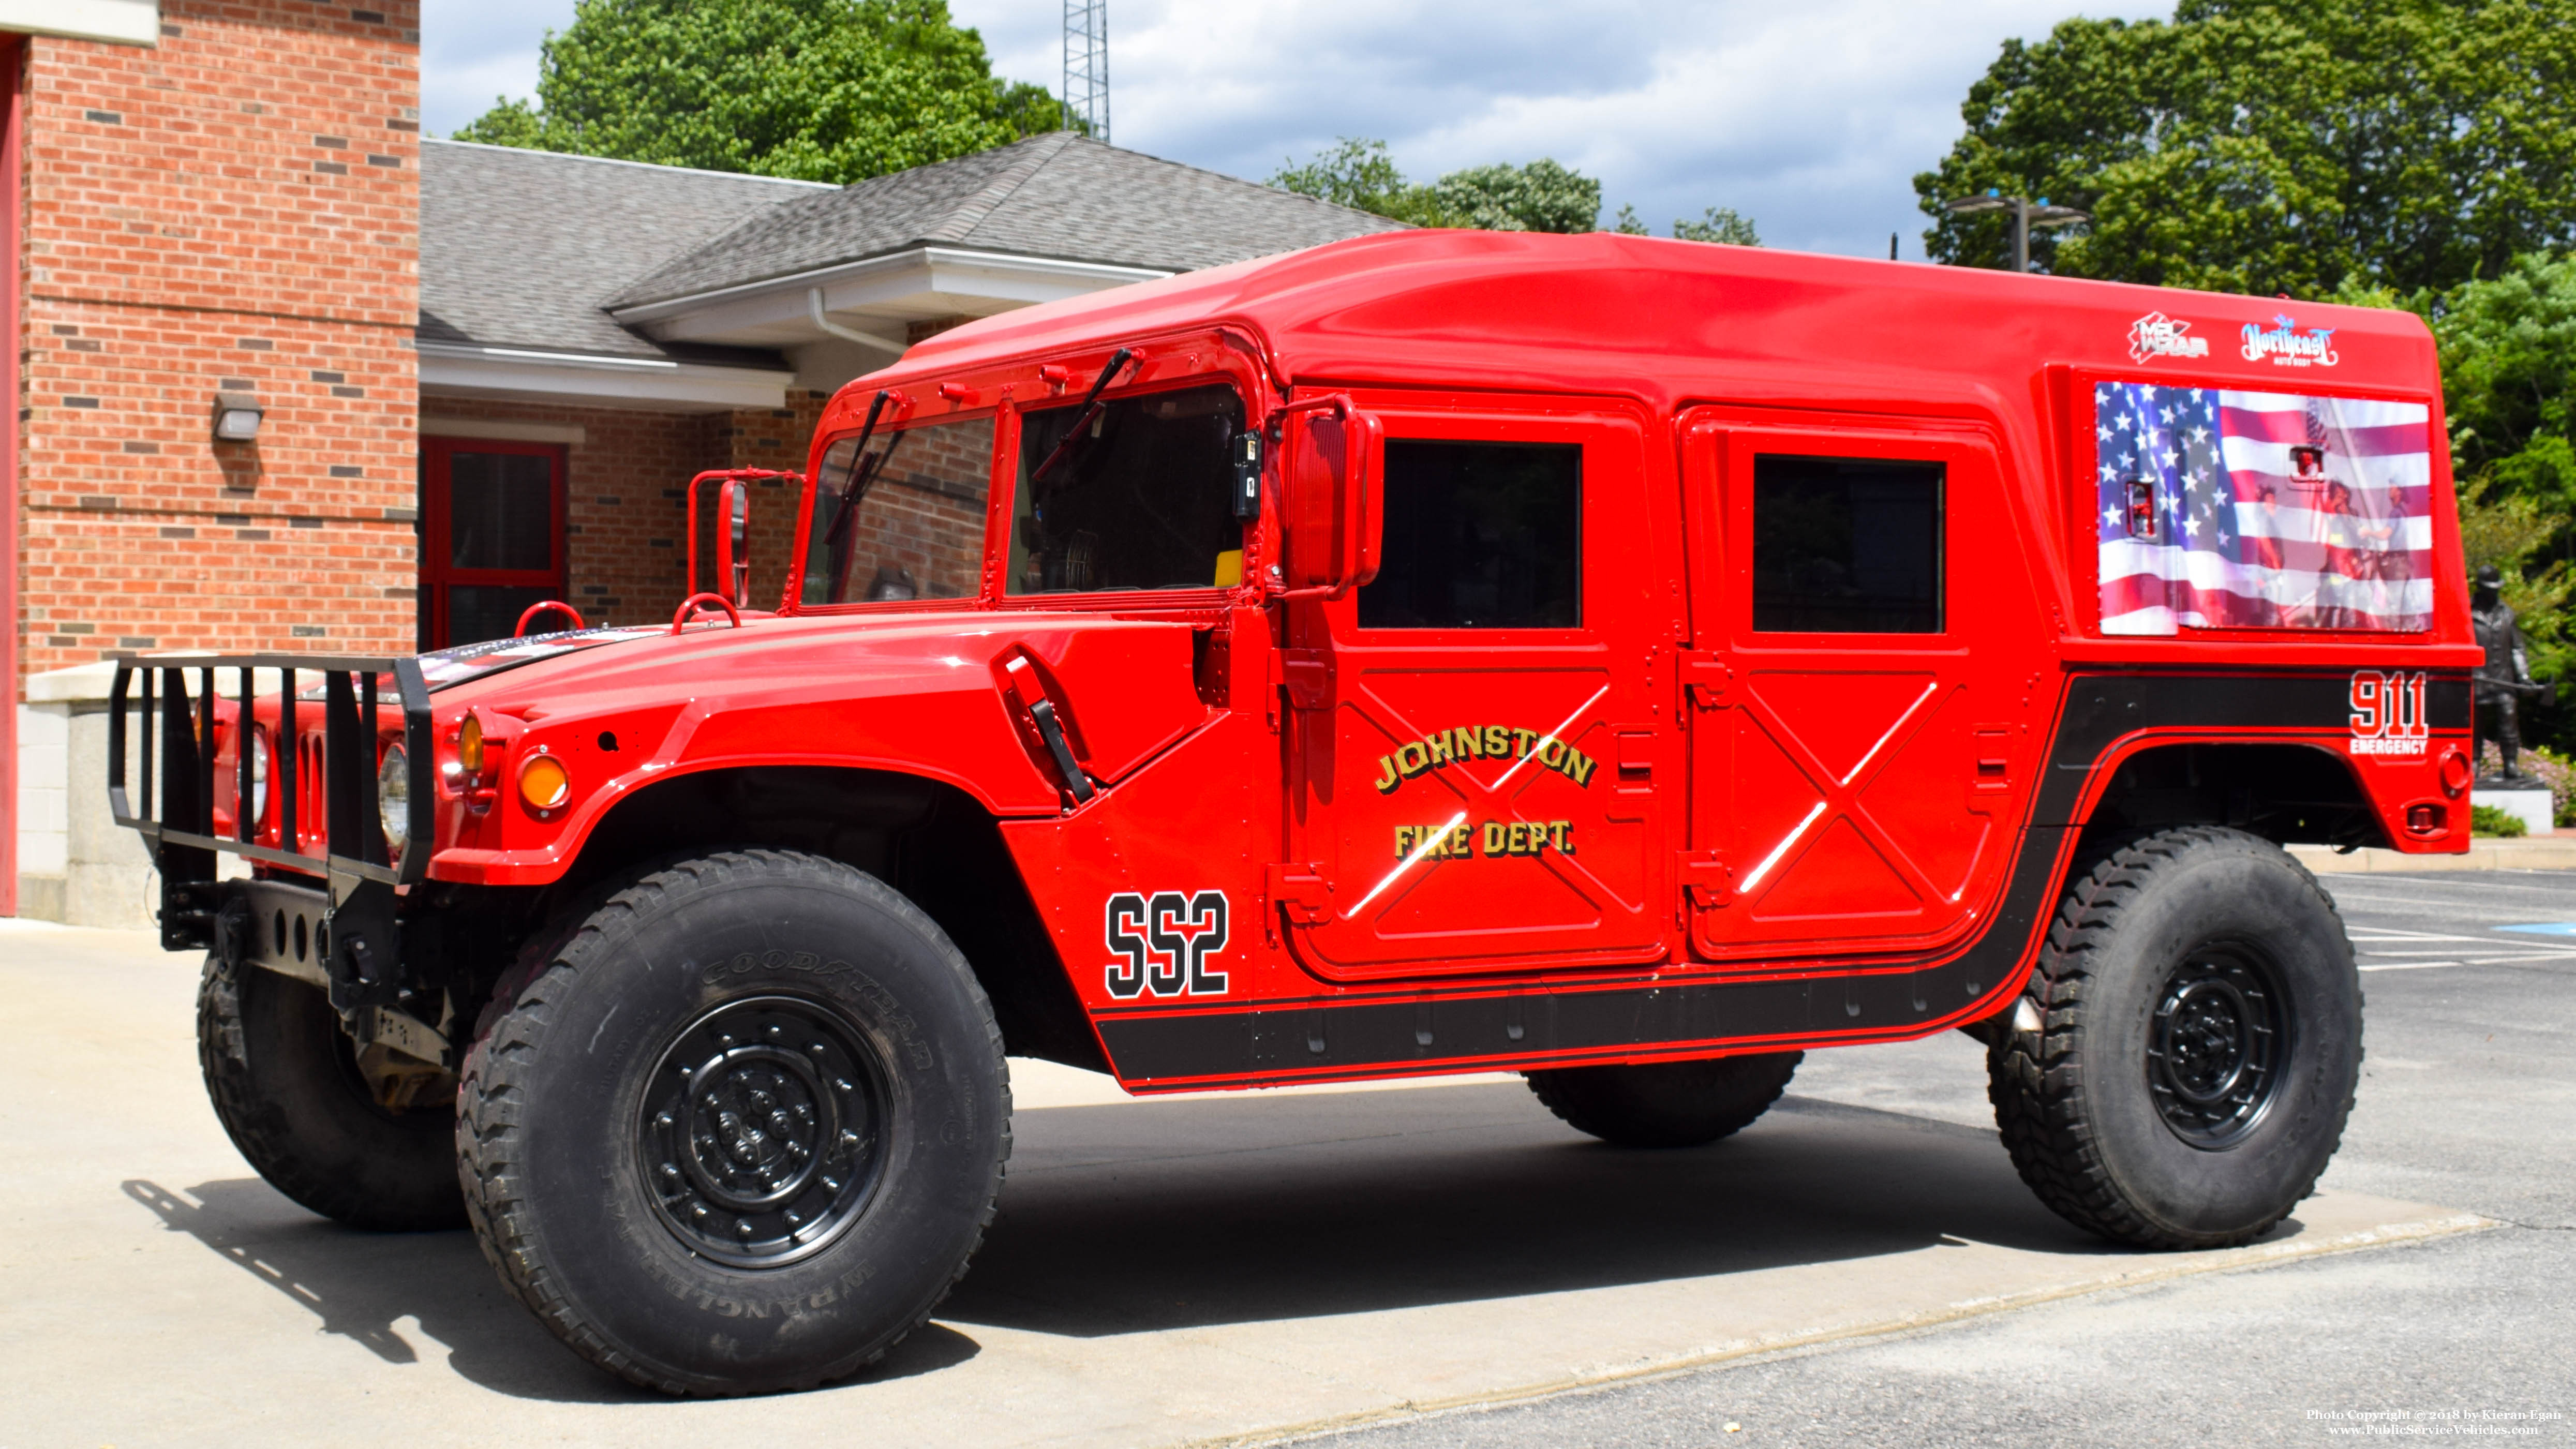 A photo  of Johnston Fire
            Special Services 2, a 1989 AM General Humvee             taken by Kieran Egan